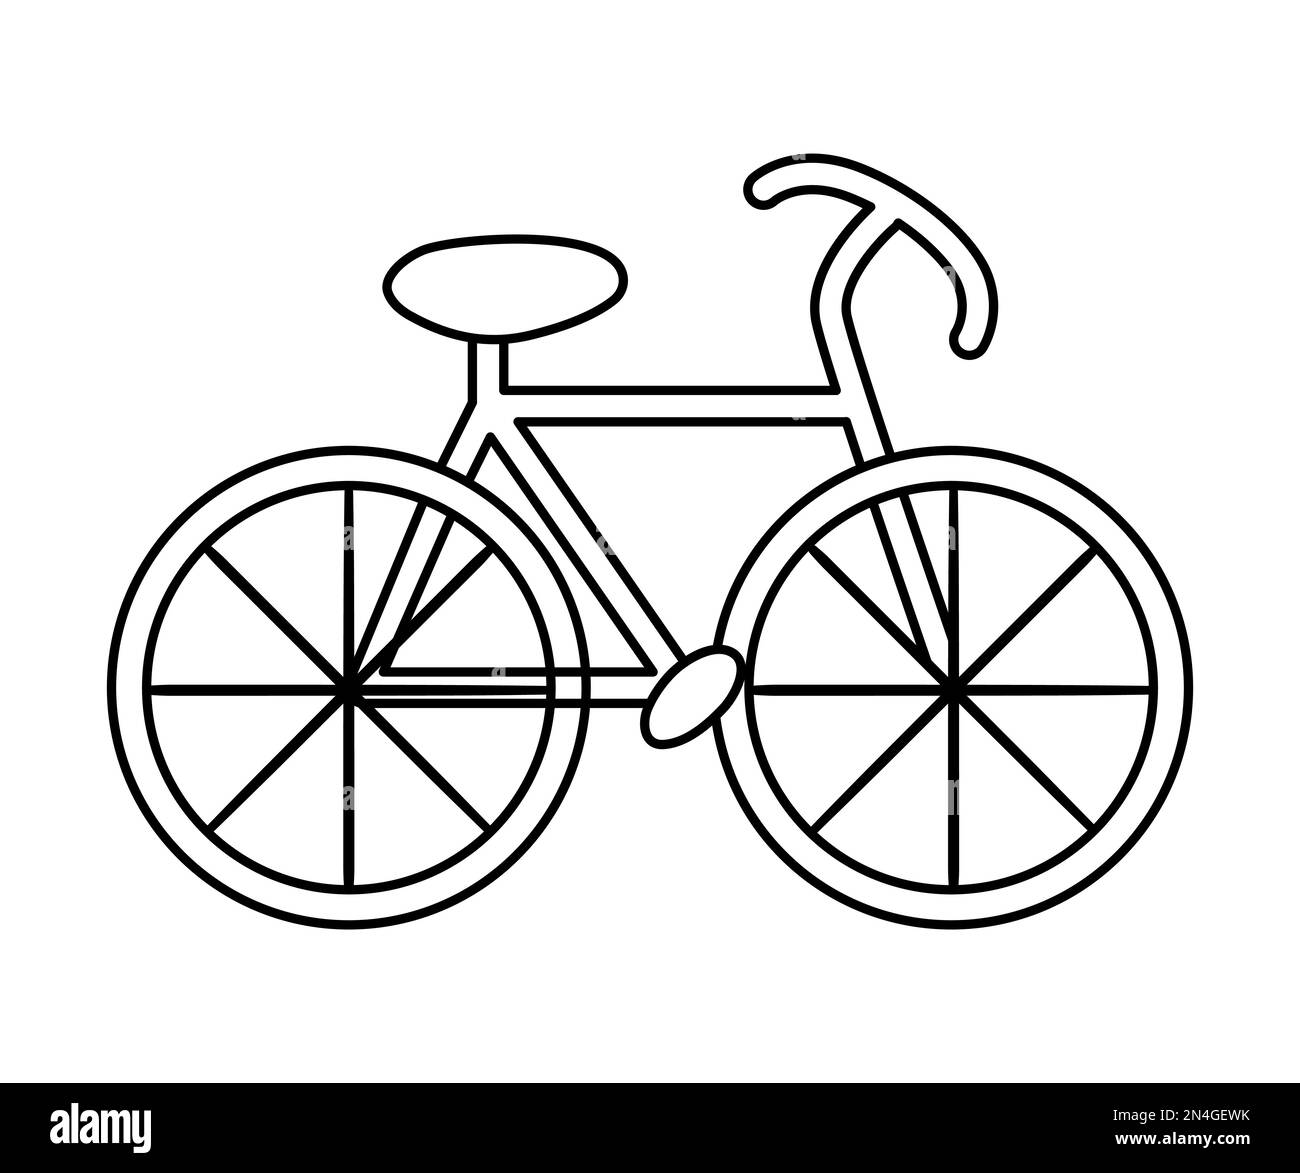 How to Draw a Bike - Easy Drawing Tutorial For Kids